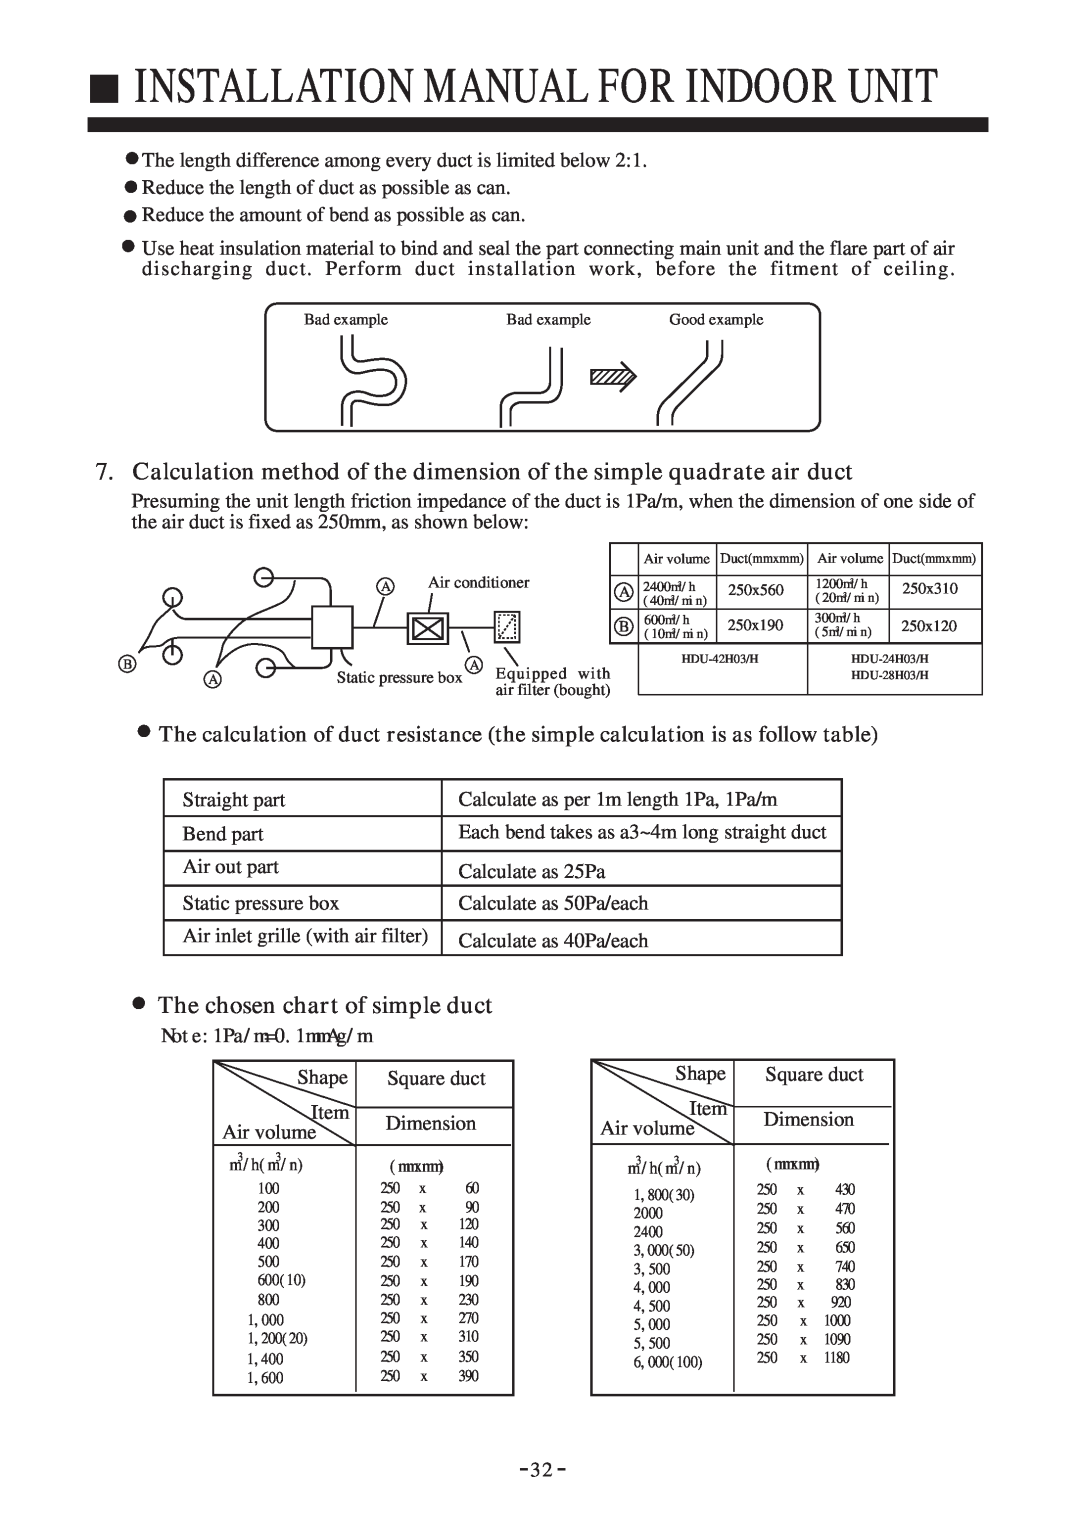 Haier HDU-24H03/H, HDU-42H03/H, HDU-28H03/H The chosen chart of simple duct, Installation Manual For Indoor Unit 